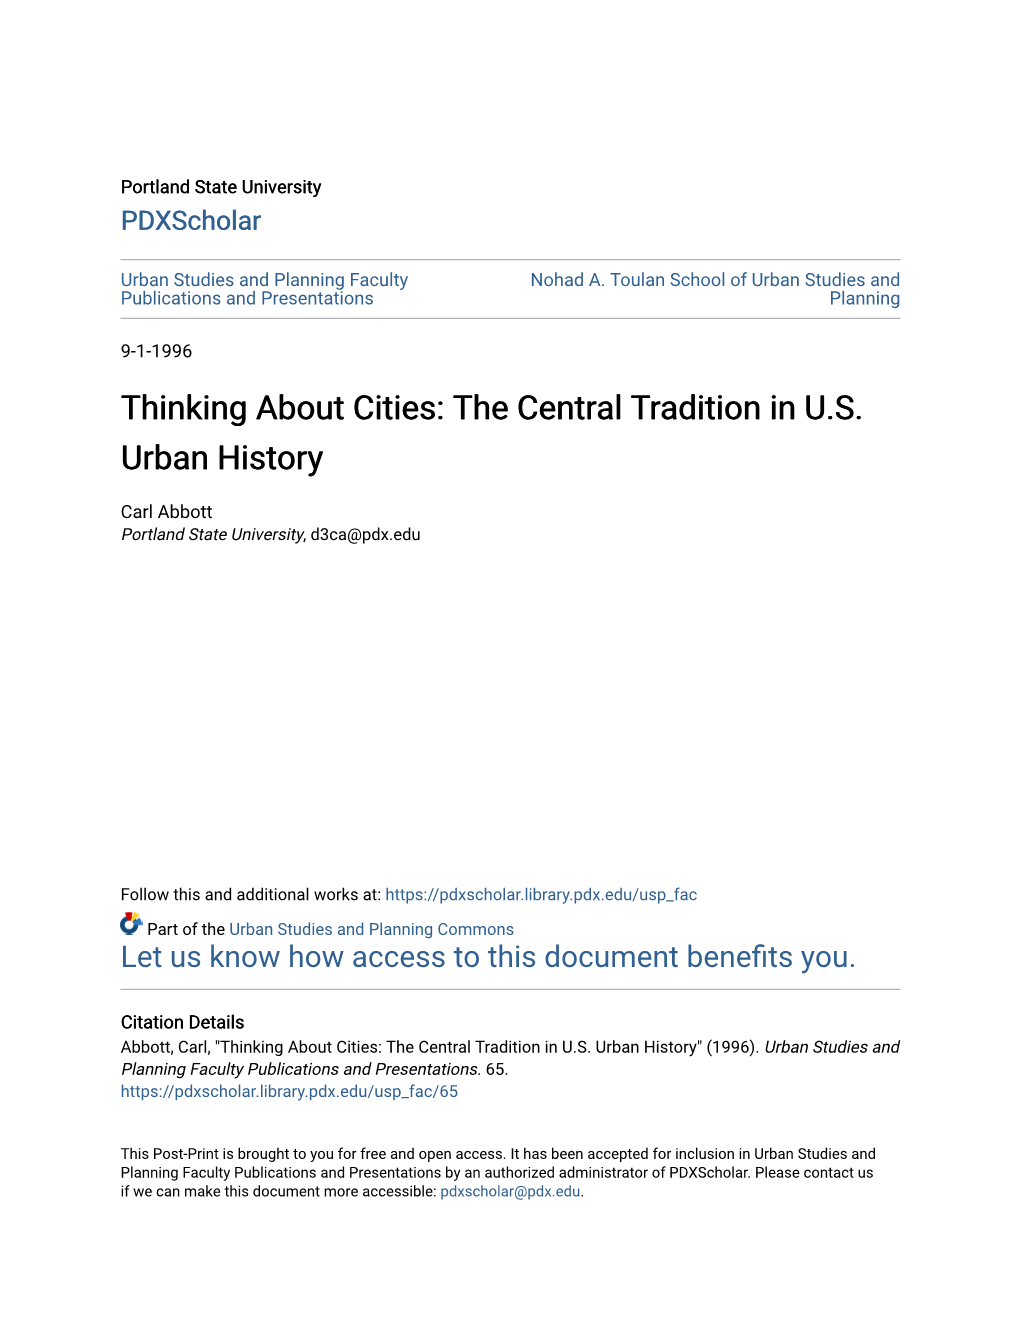 Thinking About Cities: the Central Tradition in U.S. Urban History